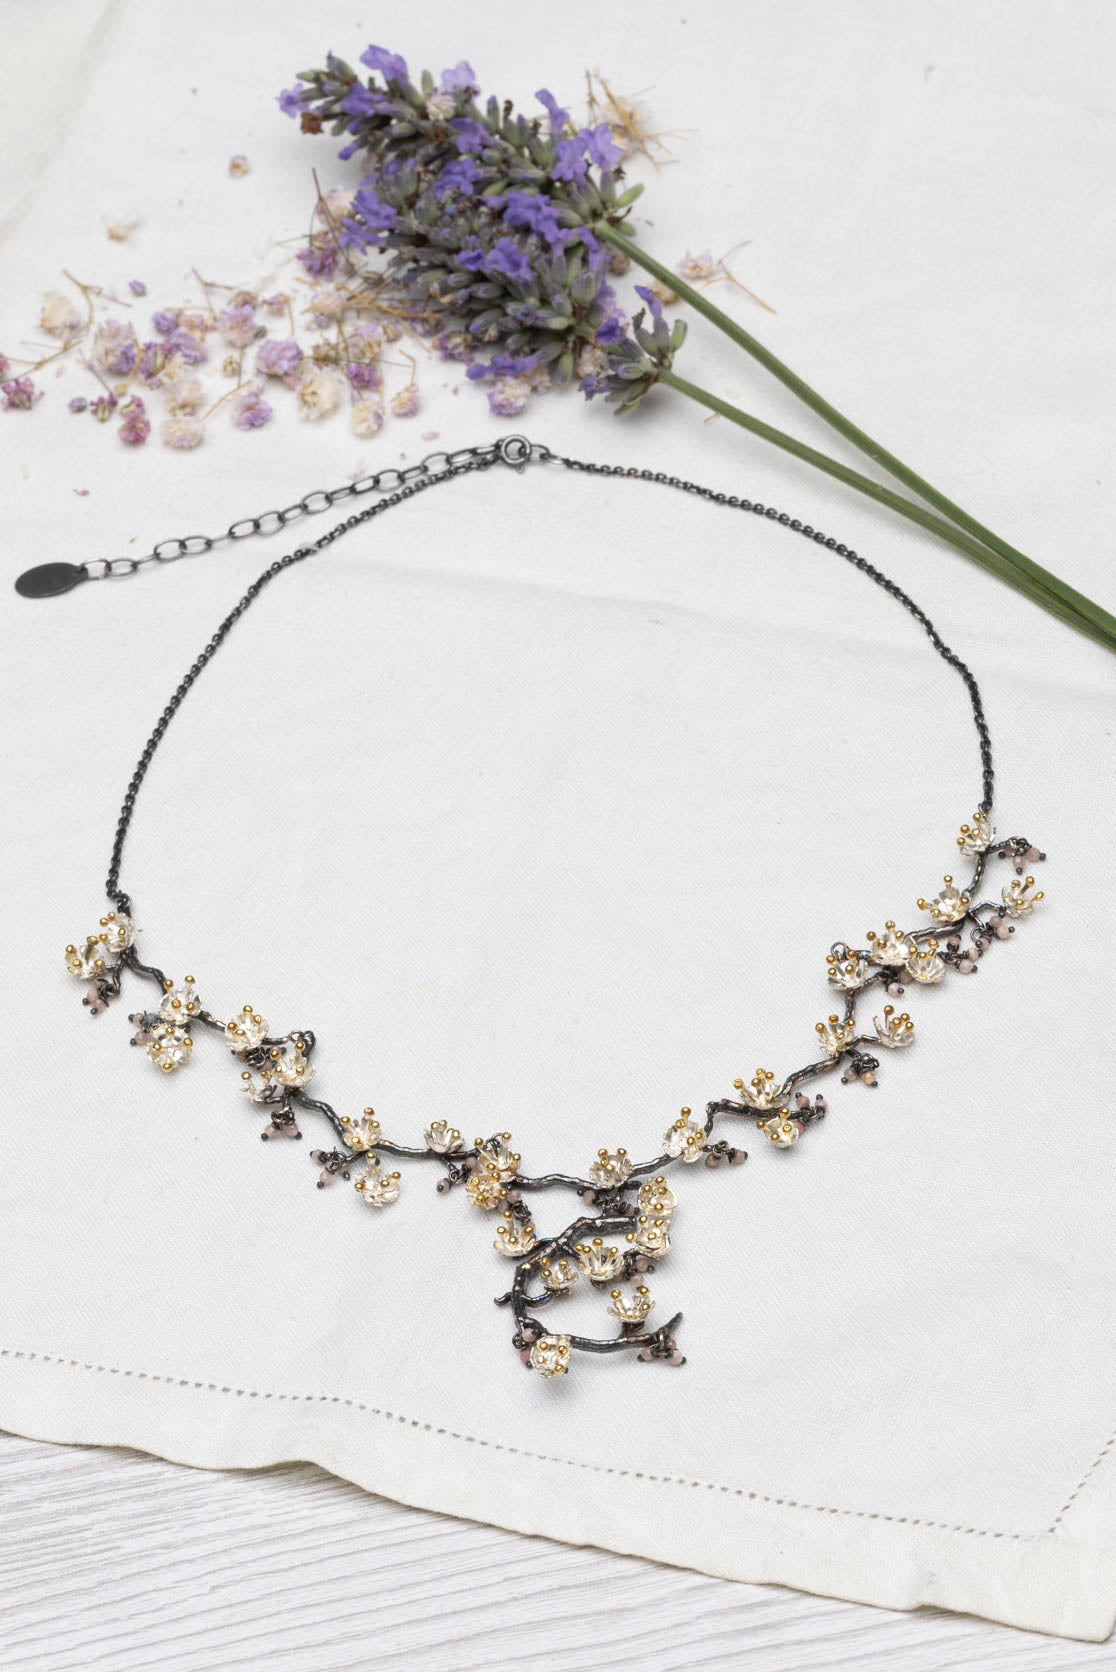 Almond Blossom Statement Necklace in oxidised sterling silver